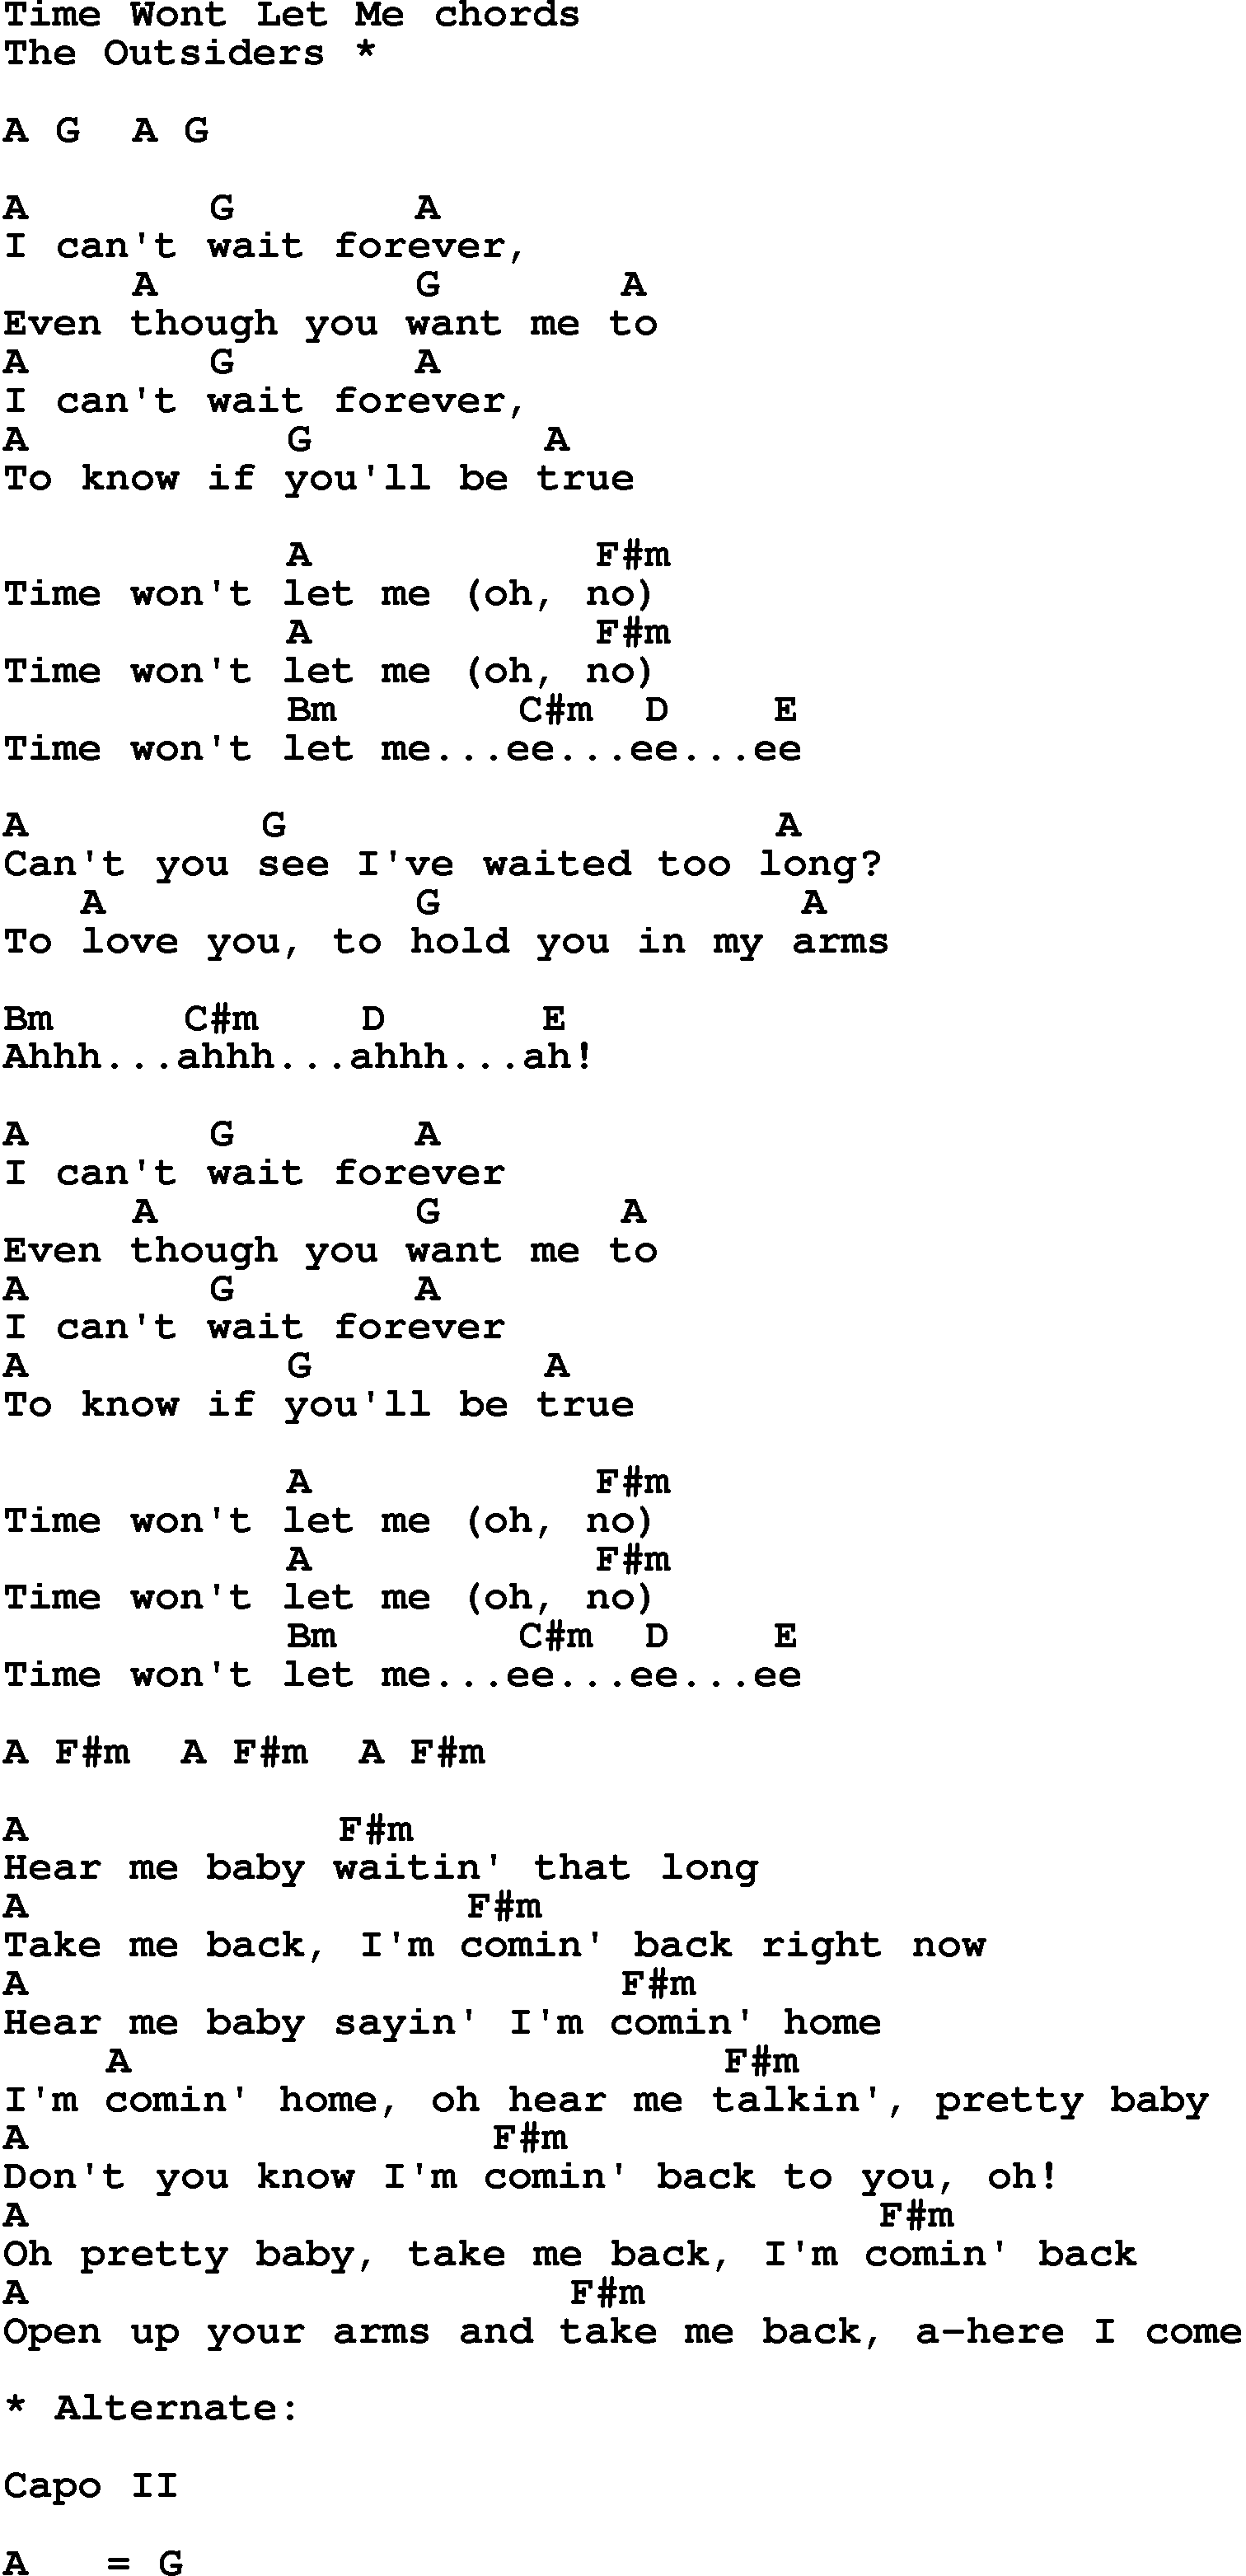 Song Lyrics with guitar chords for Time Won't Let Me